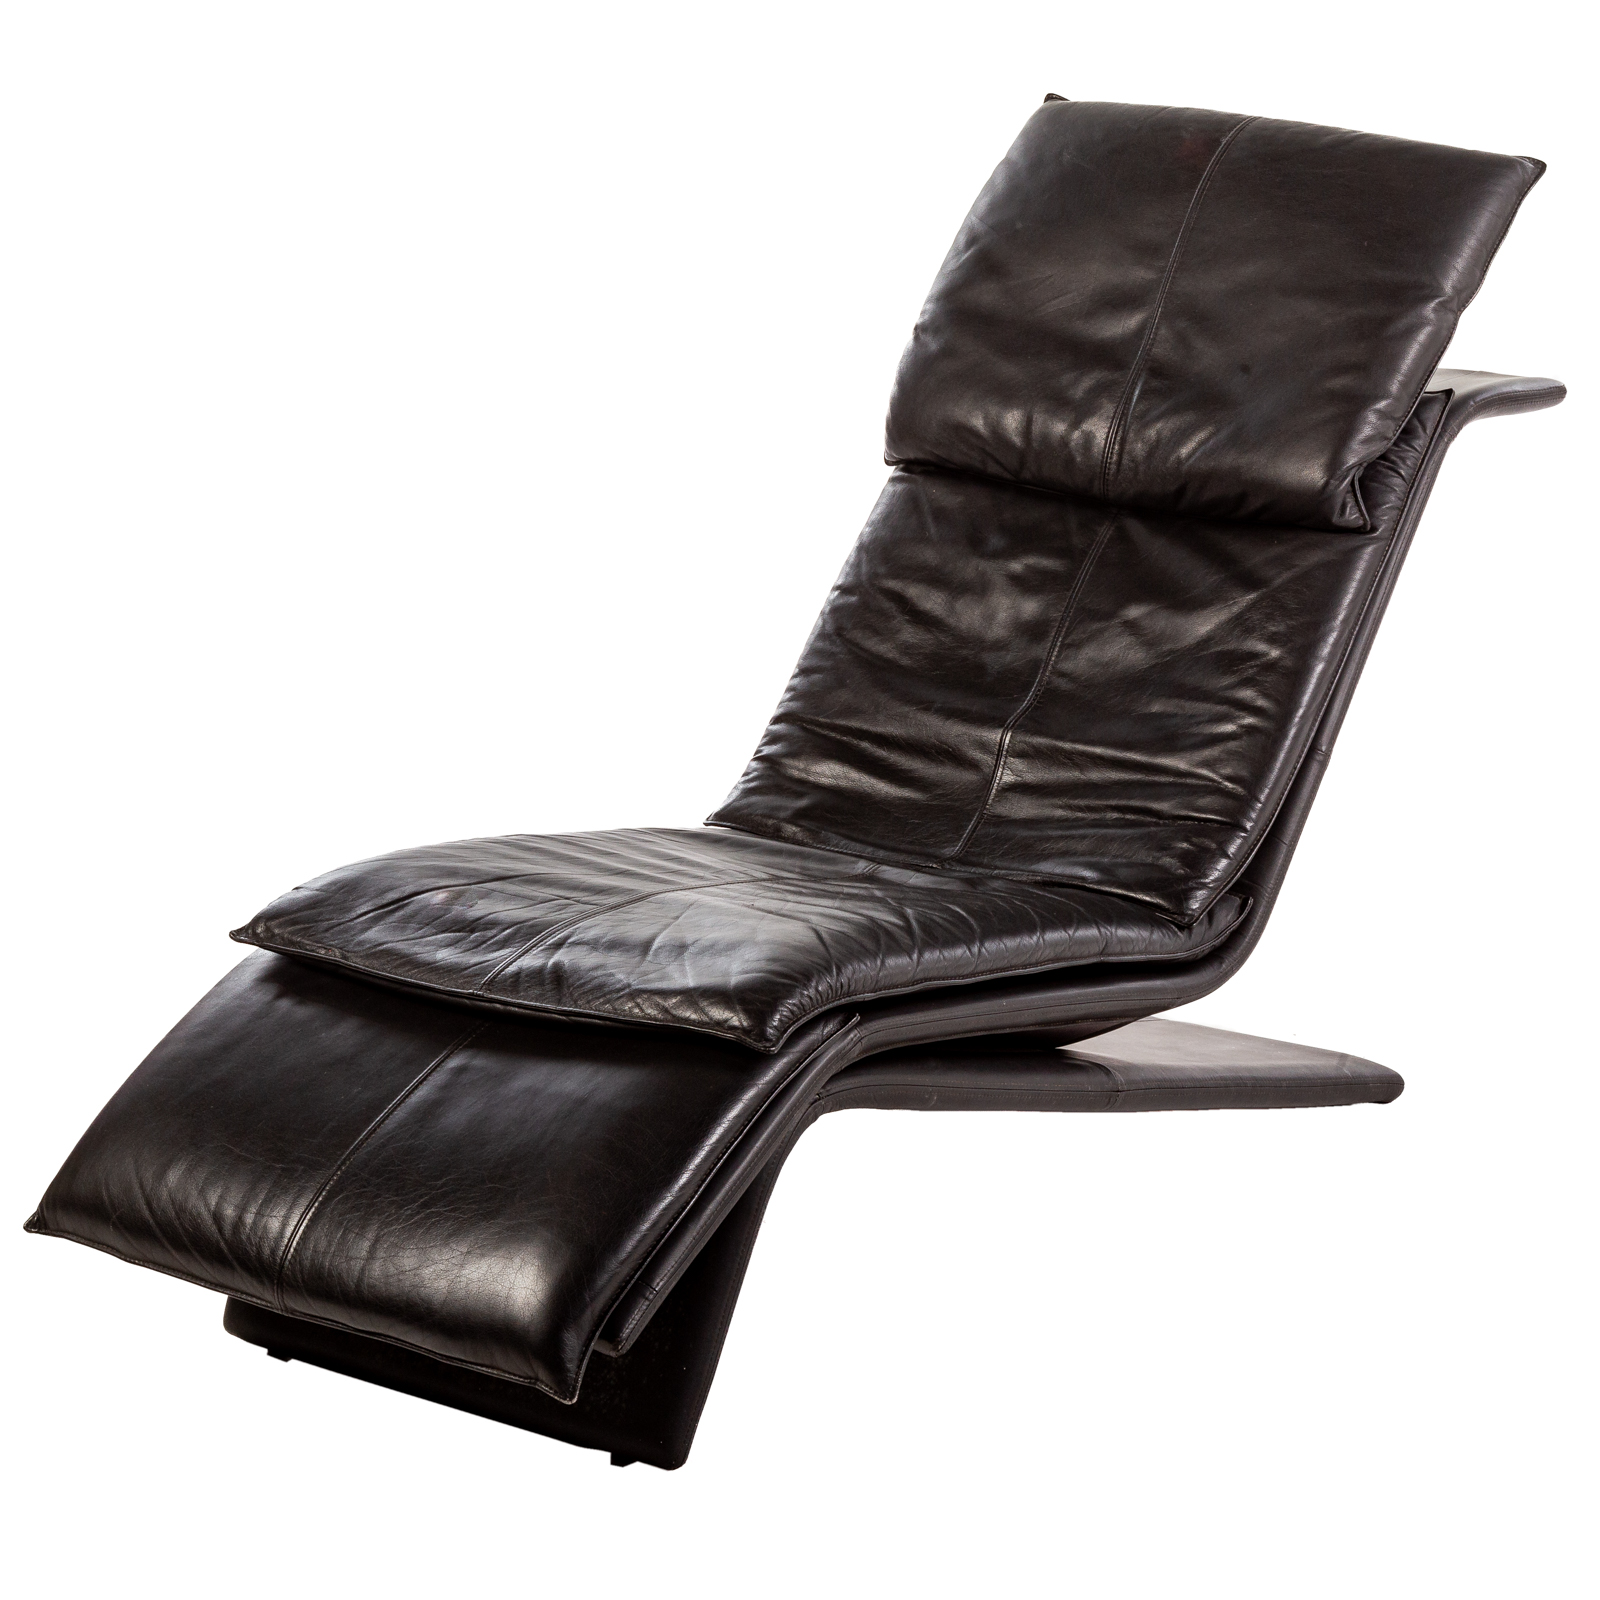 LEATHER CHAISE LOUNGE, ATTR. MAURICE